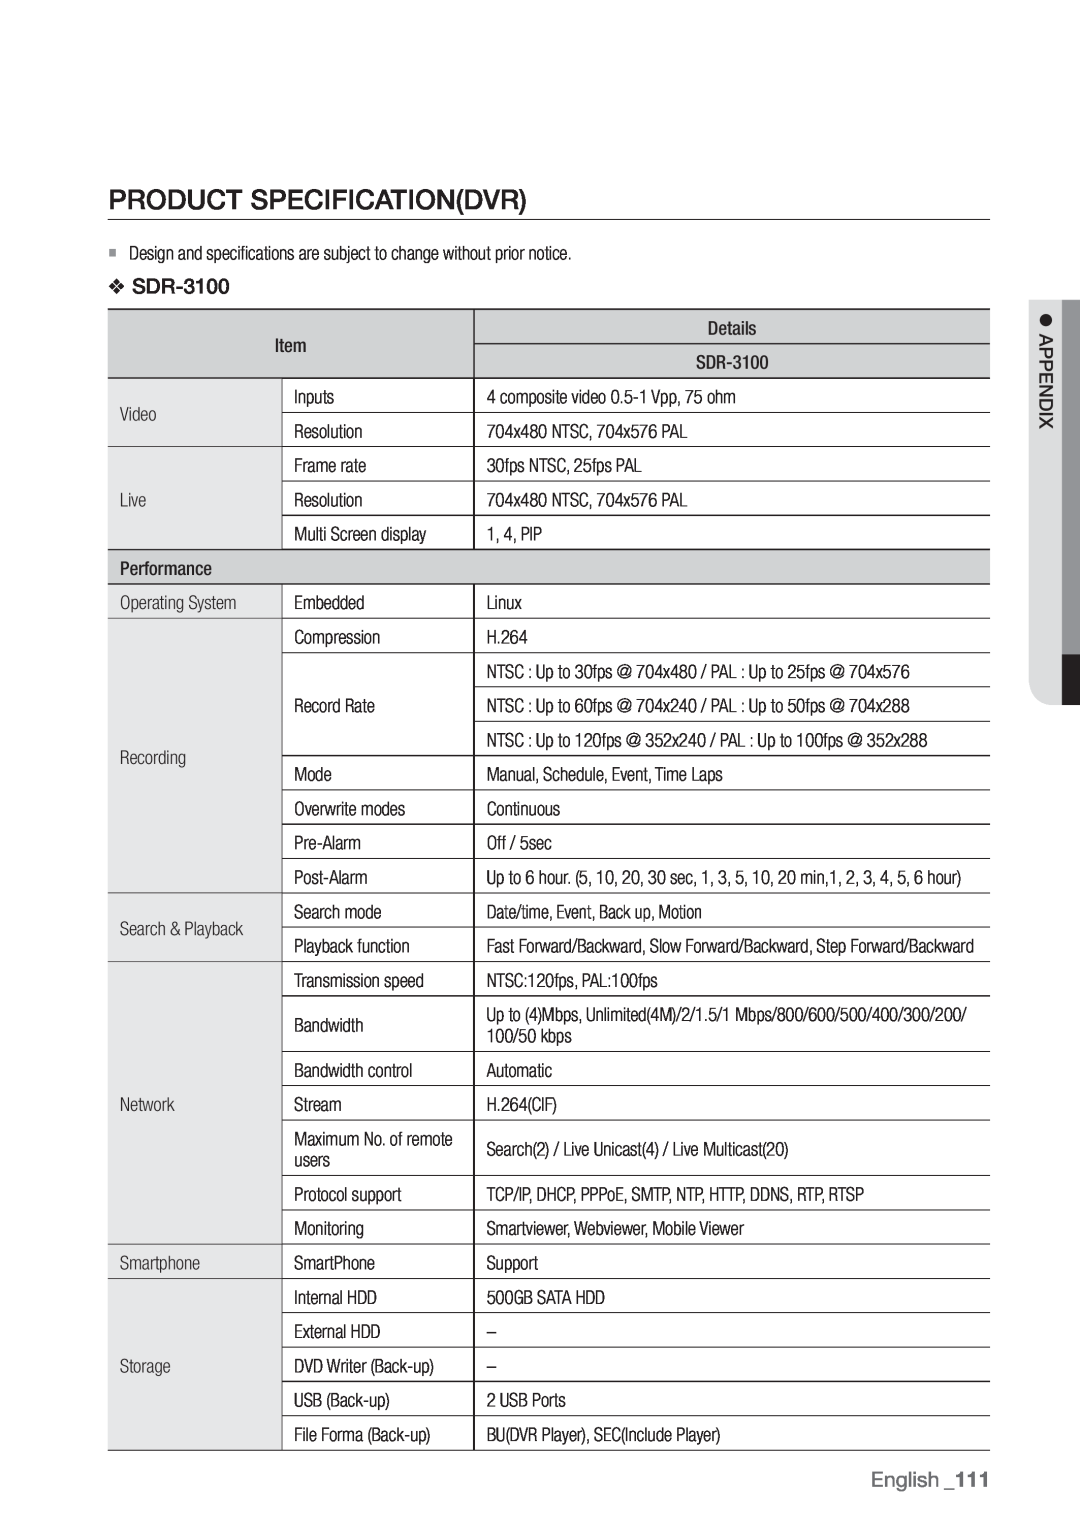 Samsung SDR3100 user manual Product SpecificationDVR, SDR-3100, English _111 